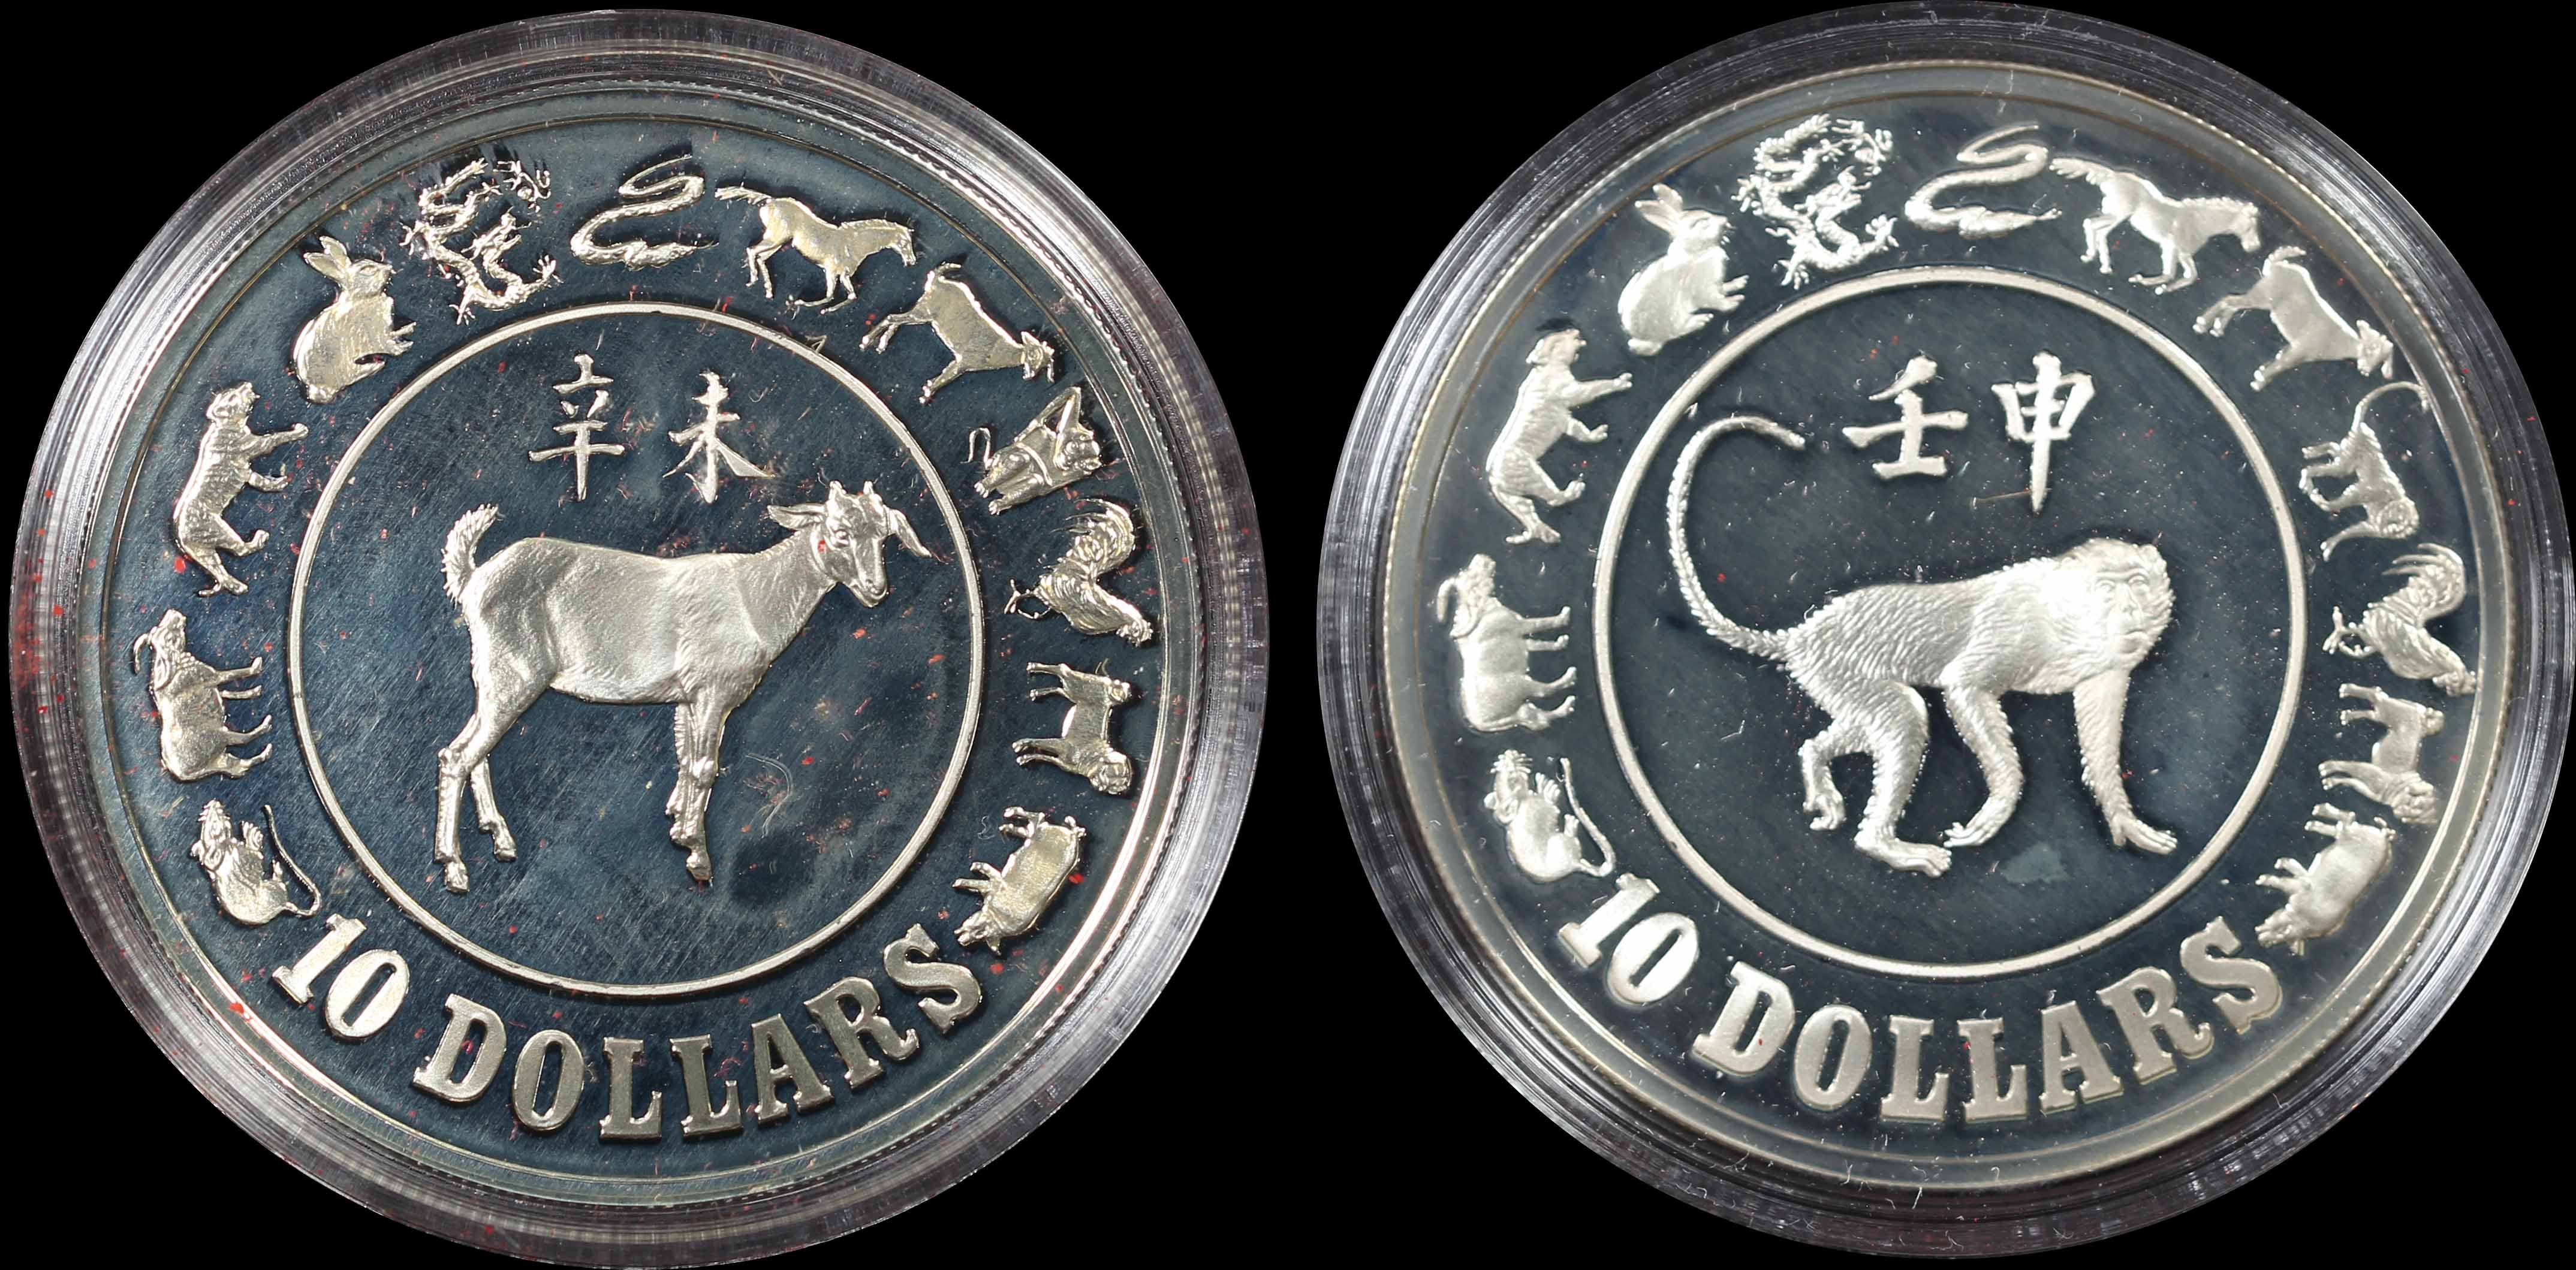 Singapore, 1991/92, 10 Dollars, Year of the Goat/Monkey, Silver 